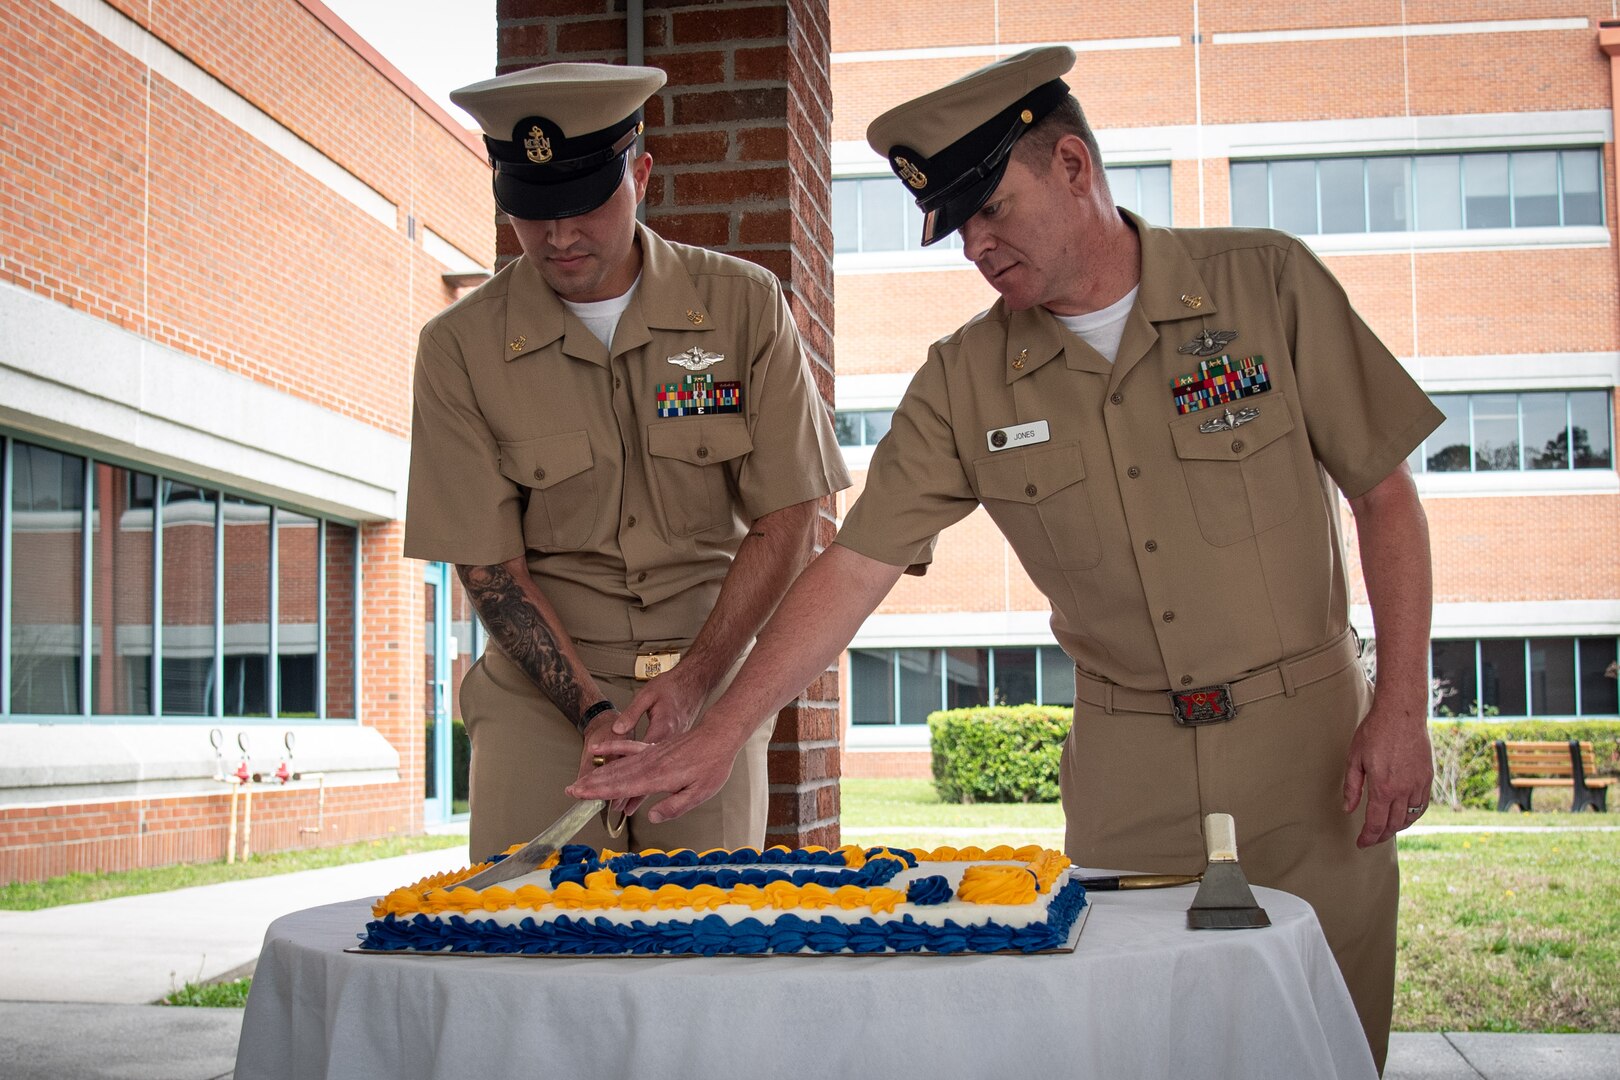 Sailors and staff serving aboard Naval Health Clinic Cherry point celebrated the 131st Birthday of the Chief Petty Officer during a ceremony held Monday, April 1 aboard Marine Corps Air Station Cherry Point.
Chief Petty Officers, past and present, were commended for their leadership and commitment to excellence during the event which involved a ceremonial cake cutting.